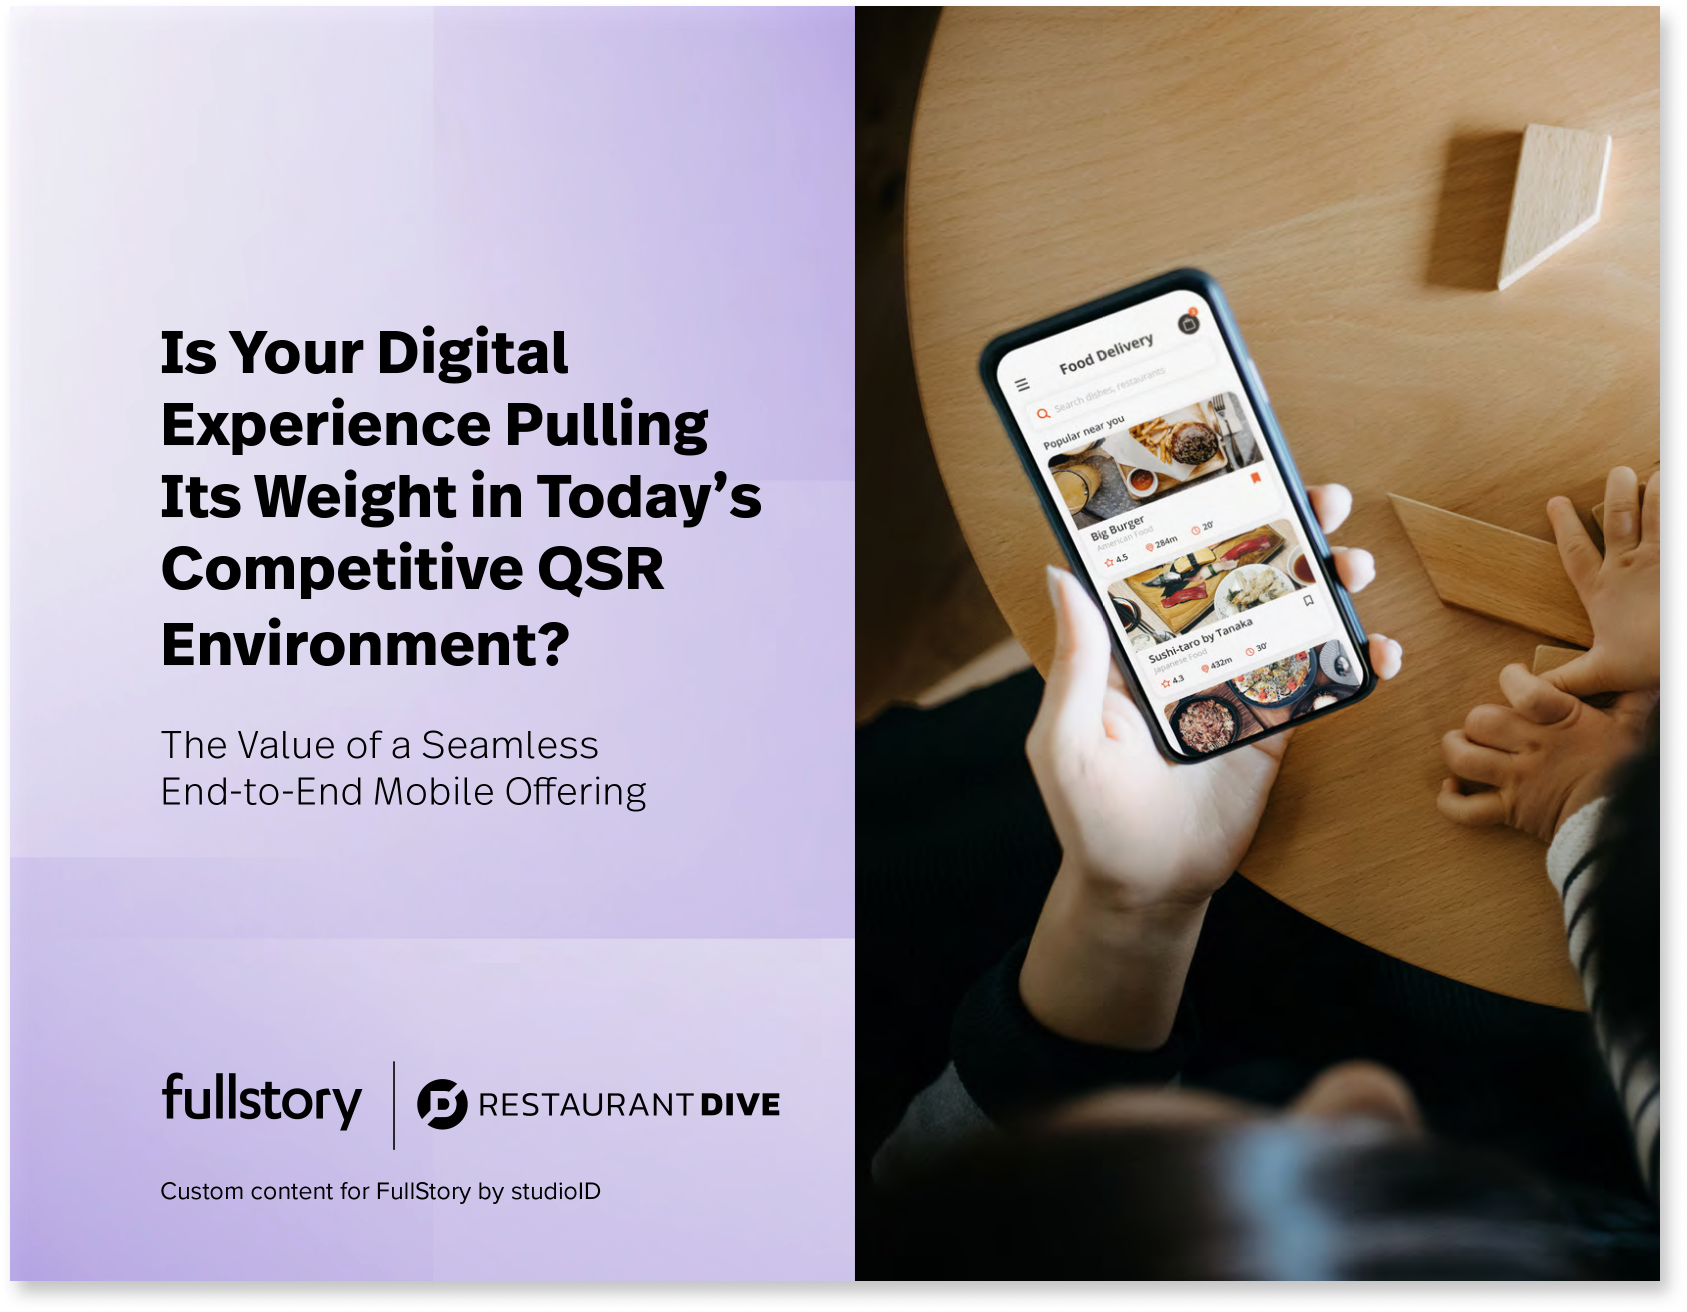 Quick-Service Restaurants: Is your digital experience pulling its weight?